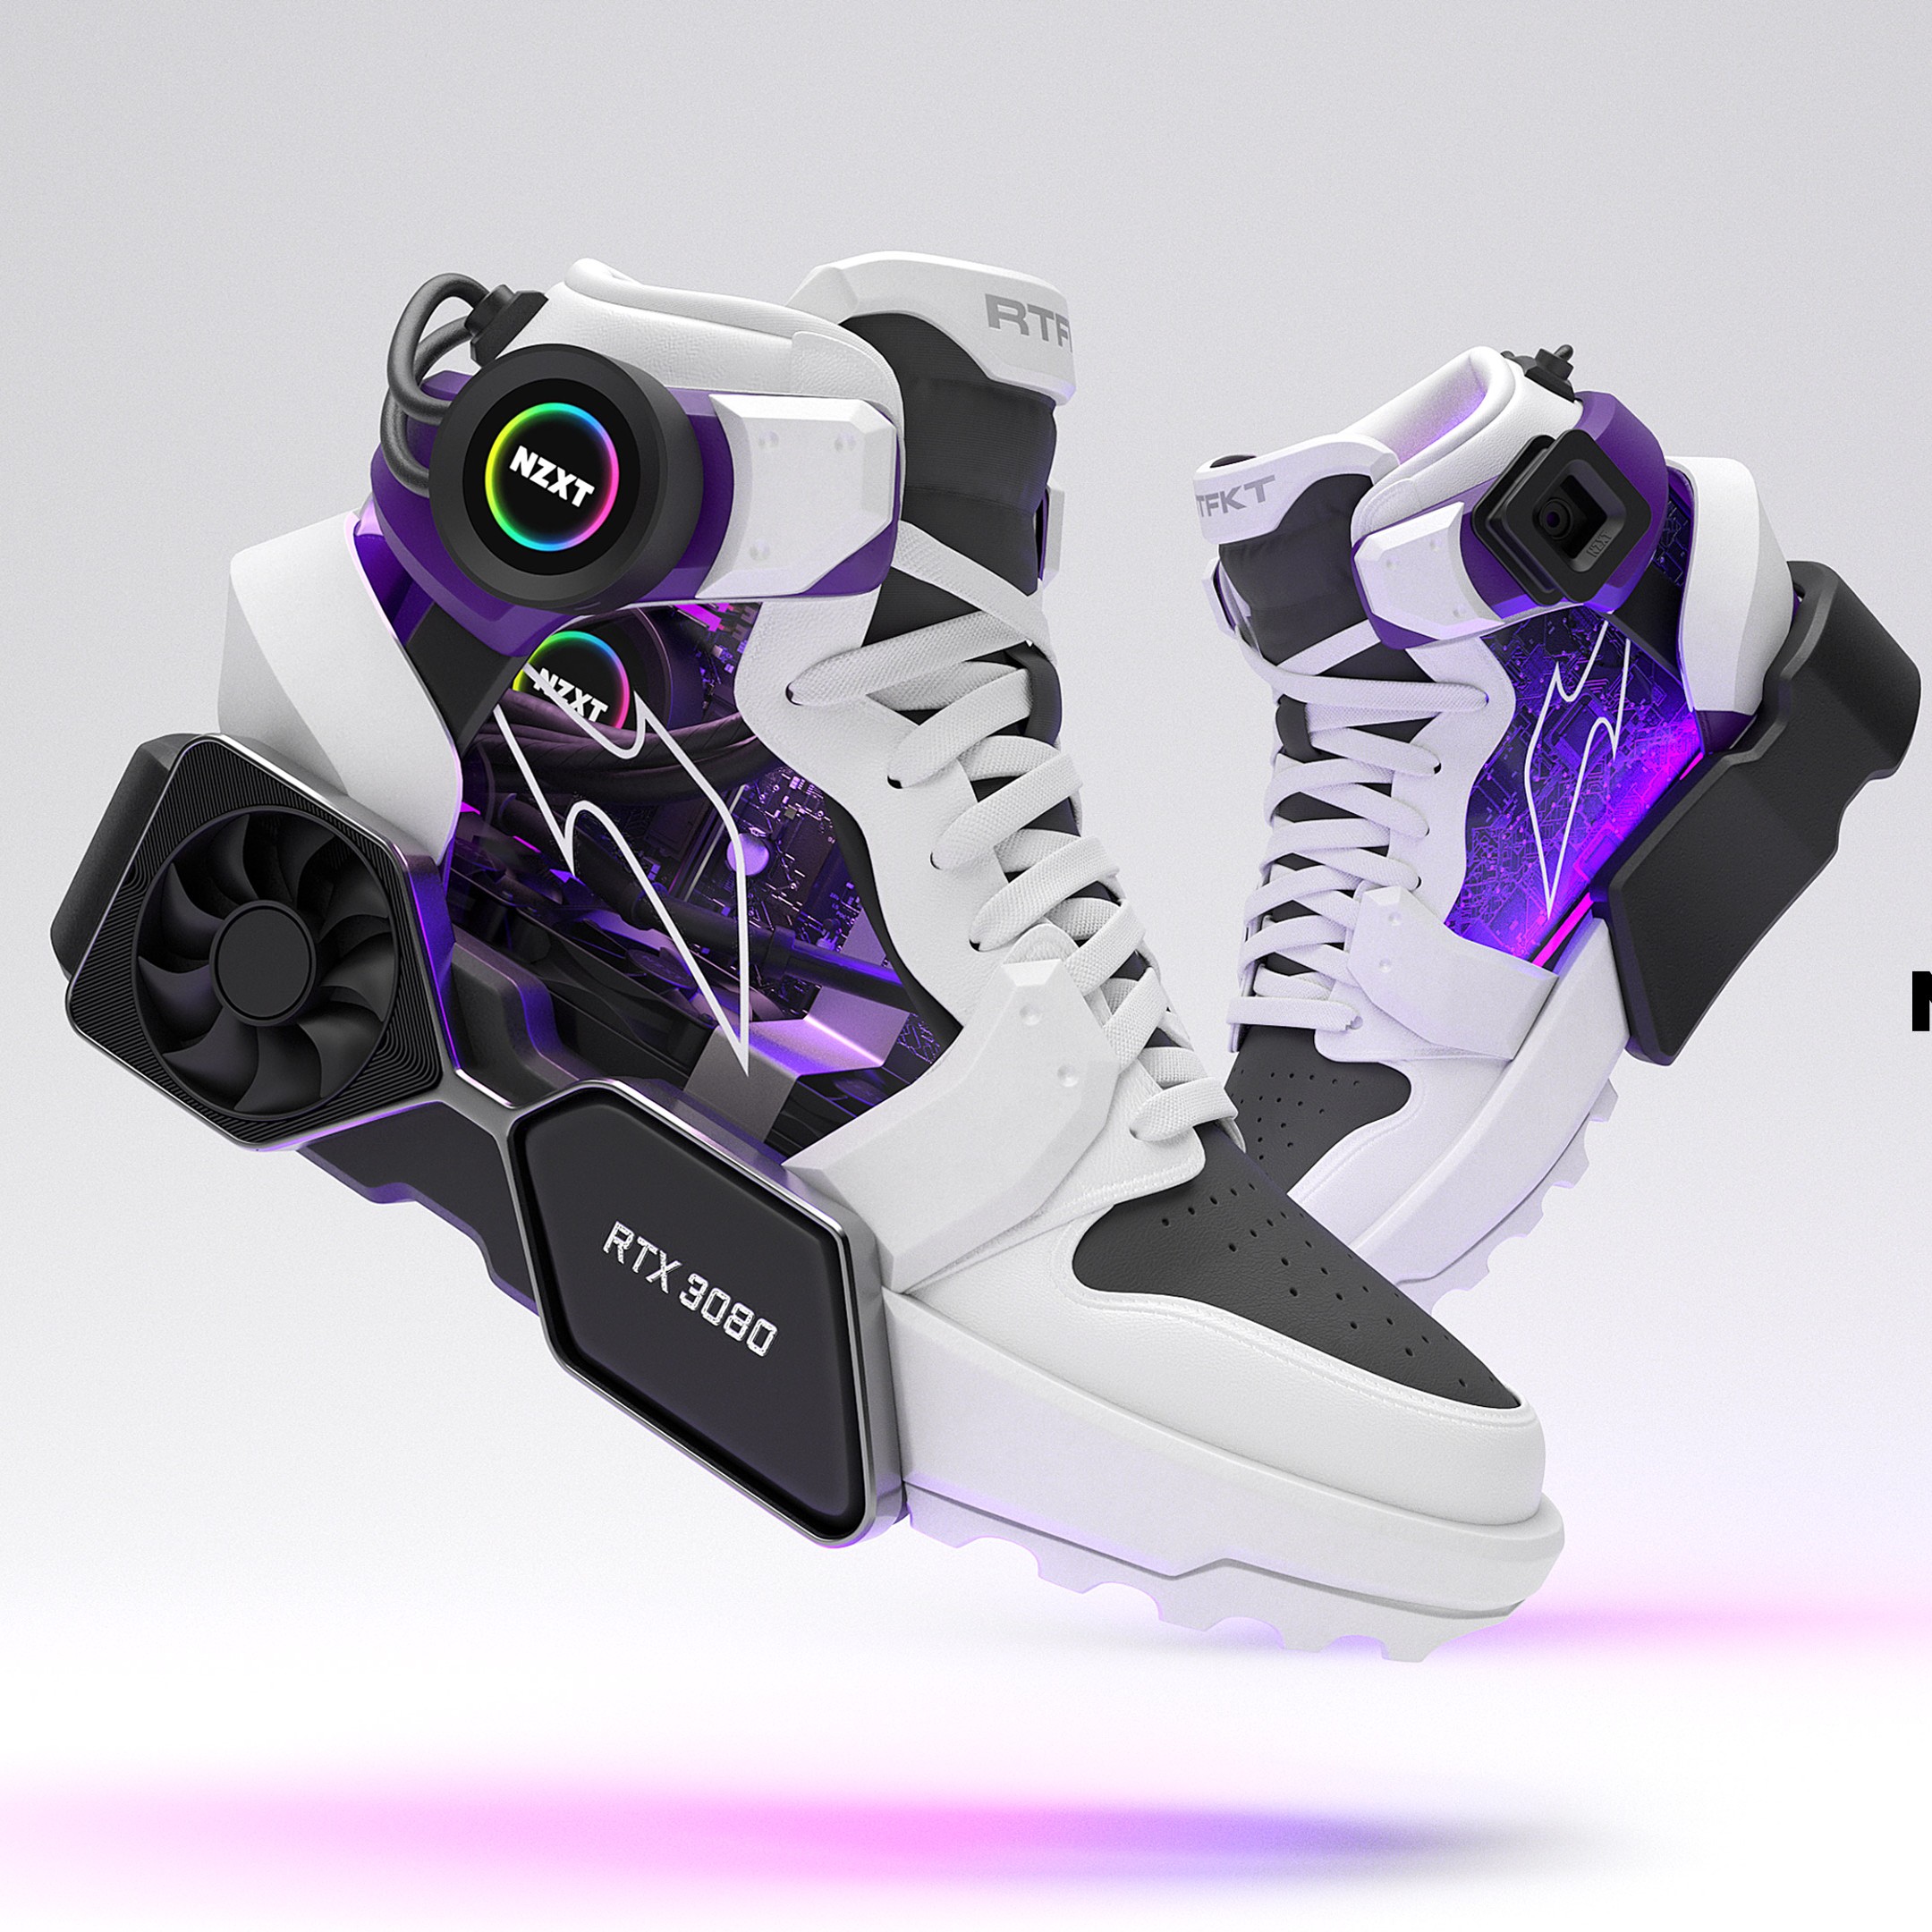 I Can't Looking at This Gaming PC Shoe